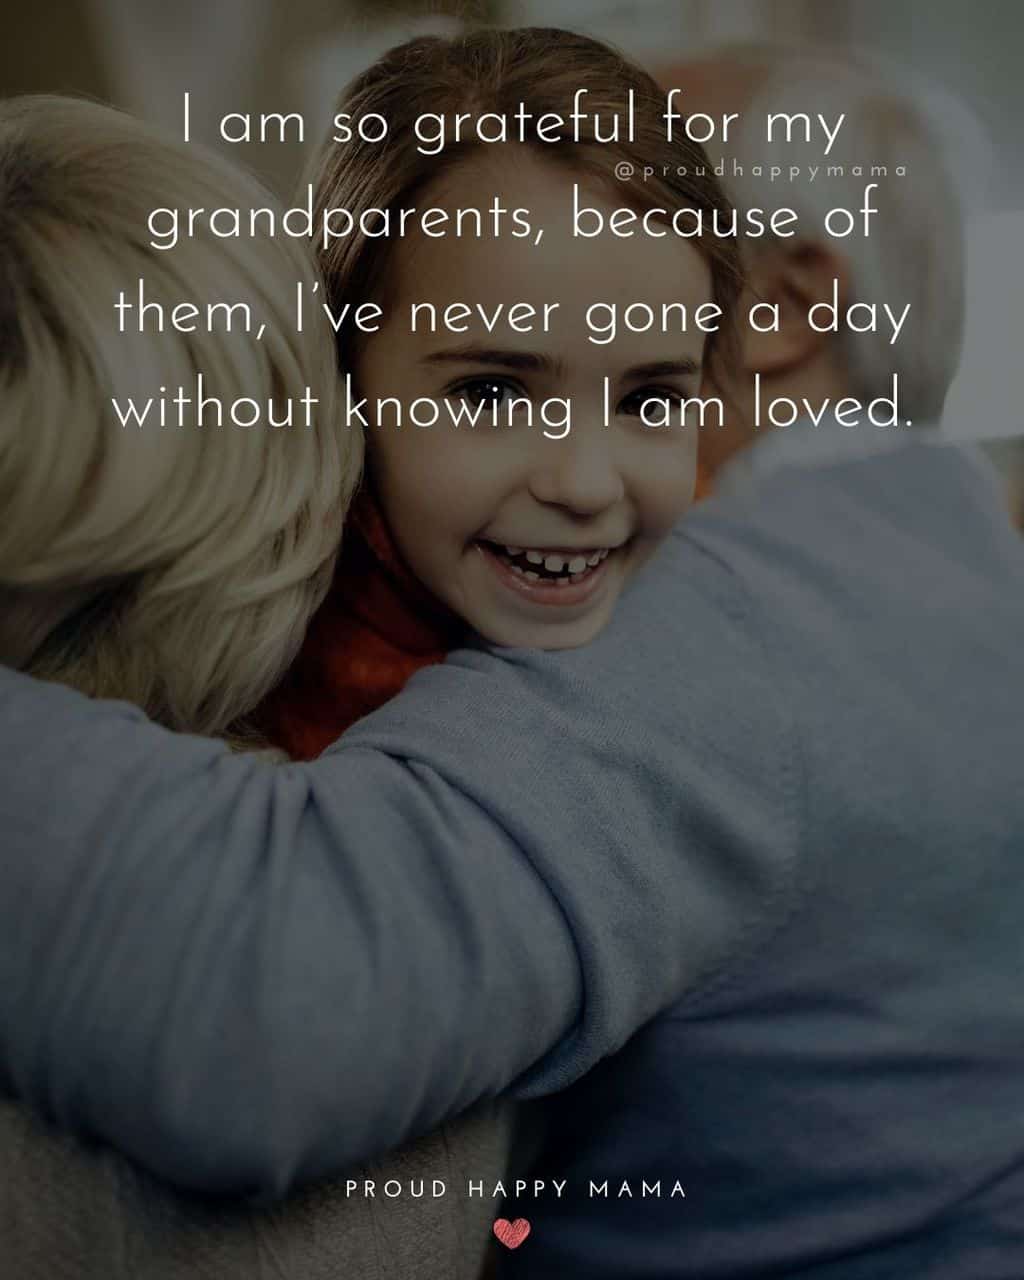 Grandparent Quotes – I am so grateful for my grandparents, because of them, I’ve never gone a day without knowing I am